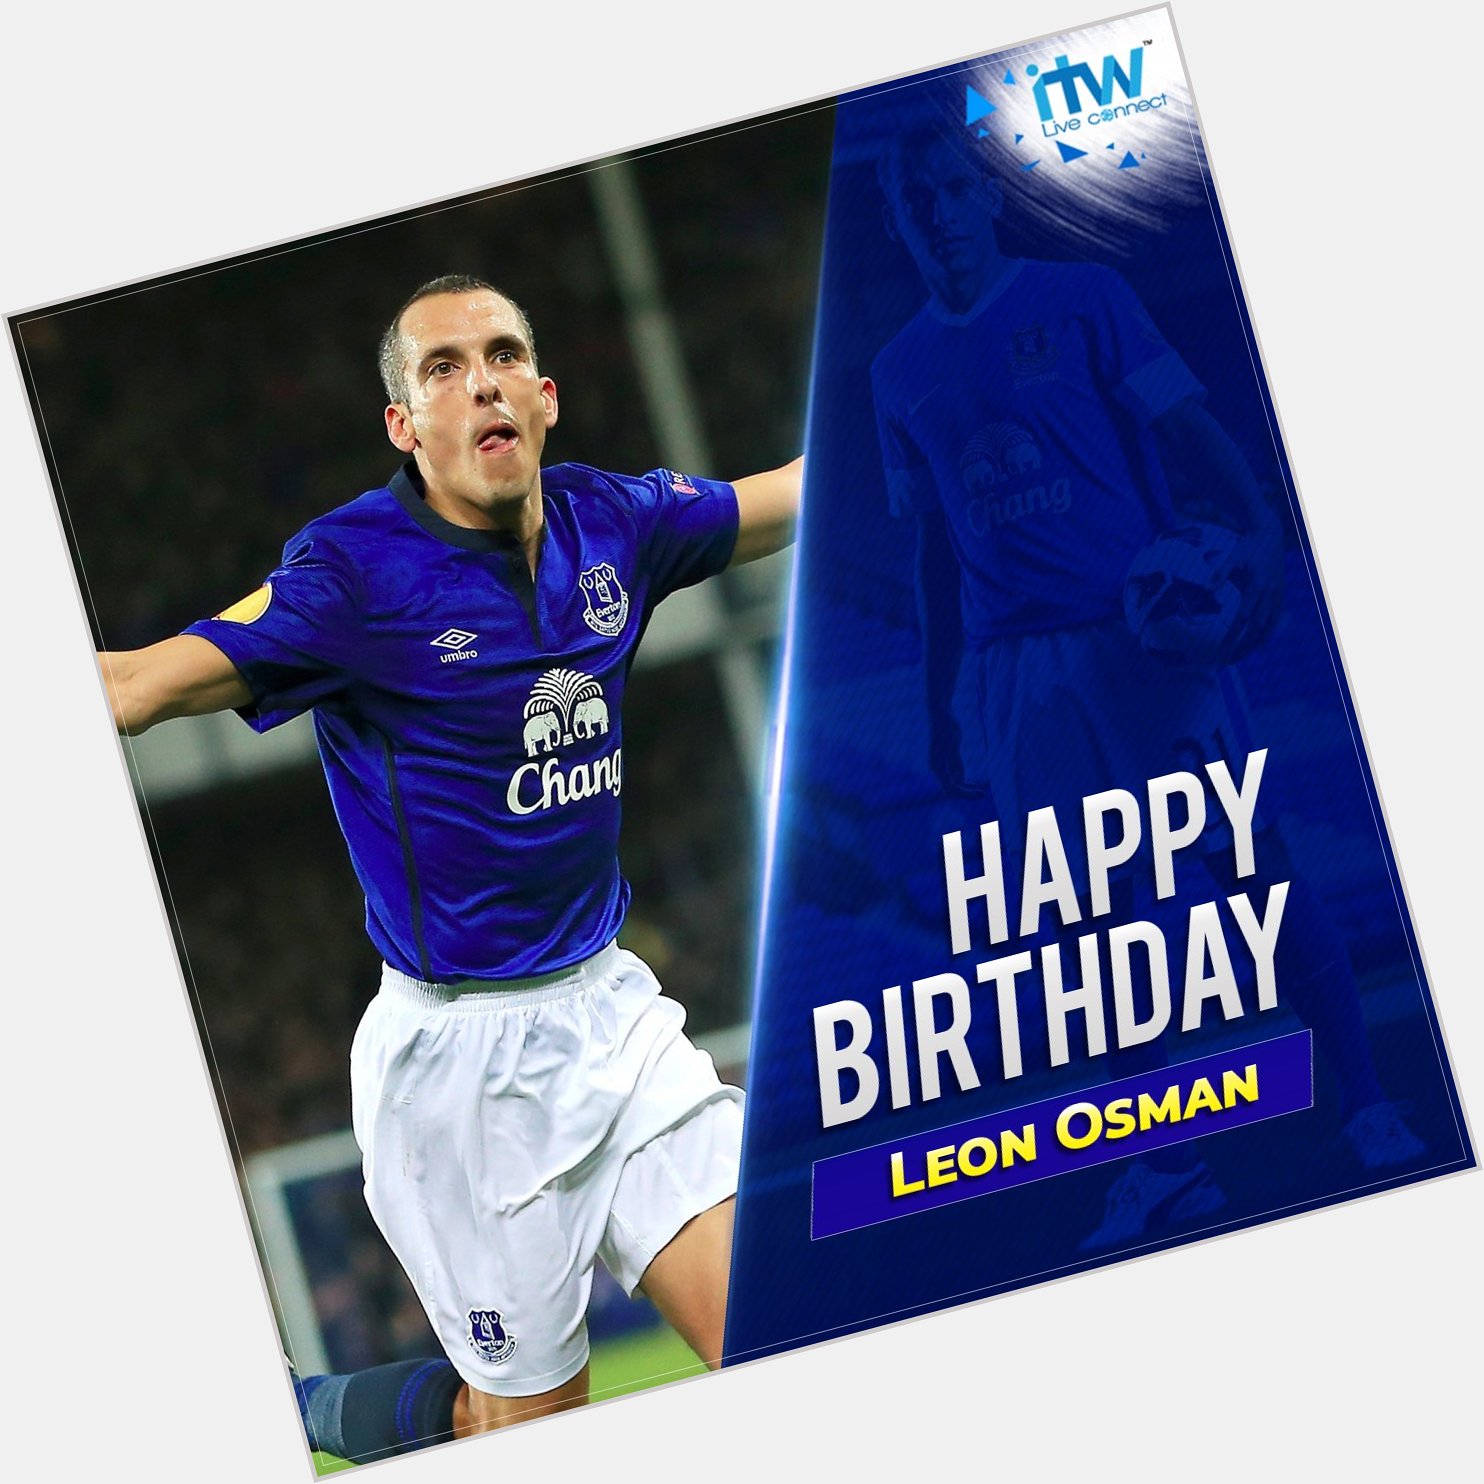 Wishing former midfield grafter Leon Osman a very Happy Birthday! He turns 37 today. 